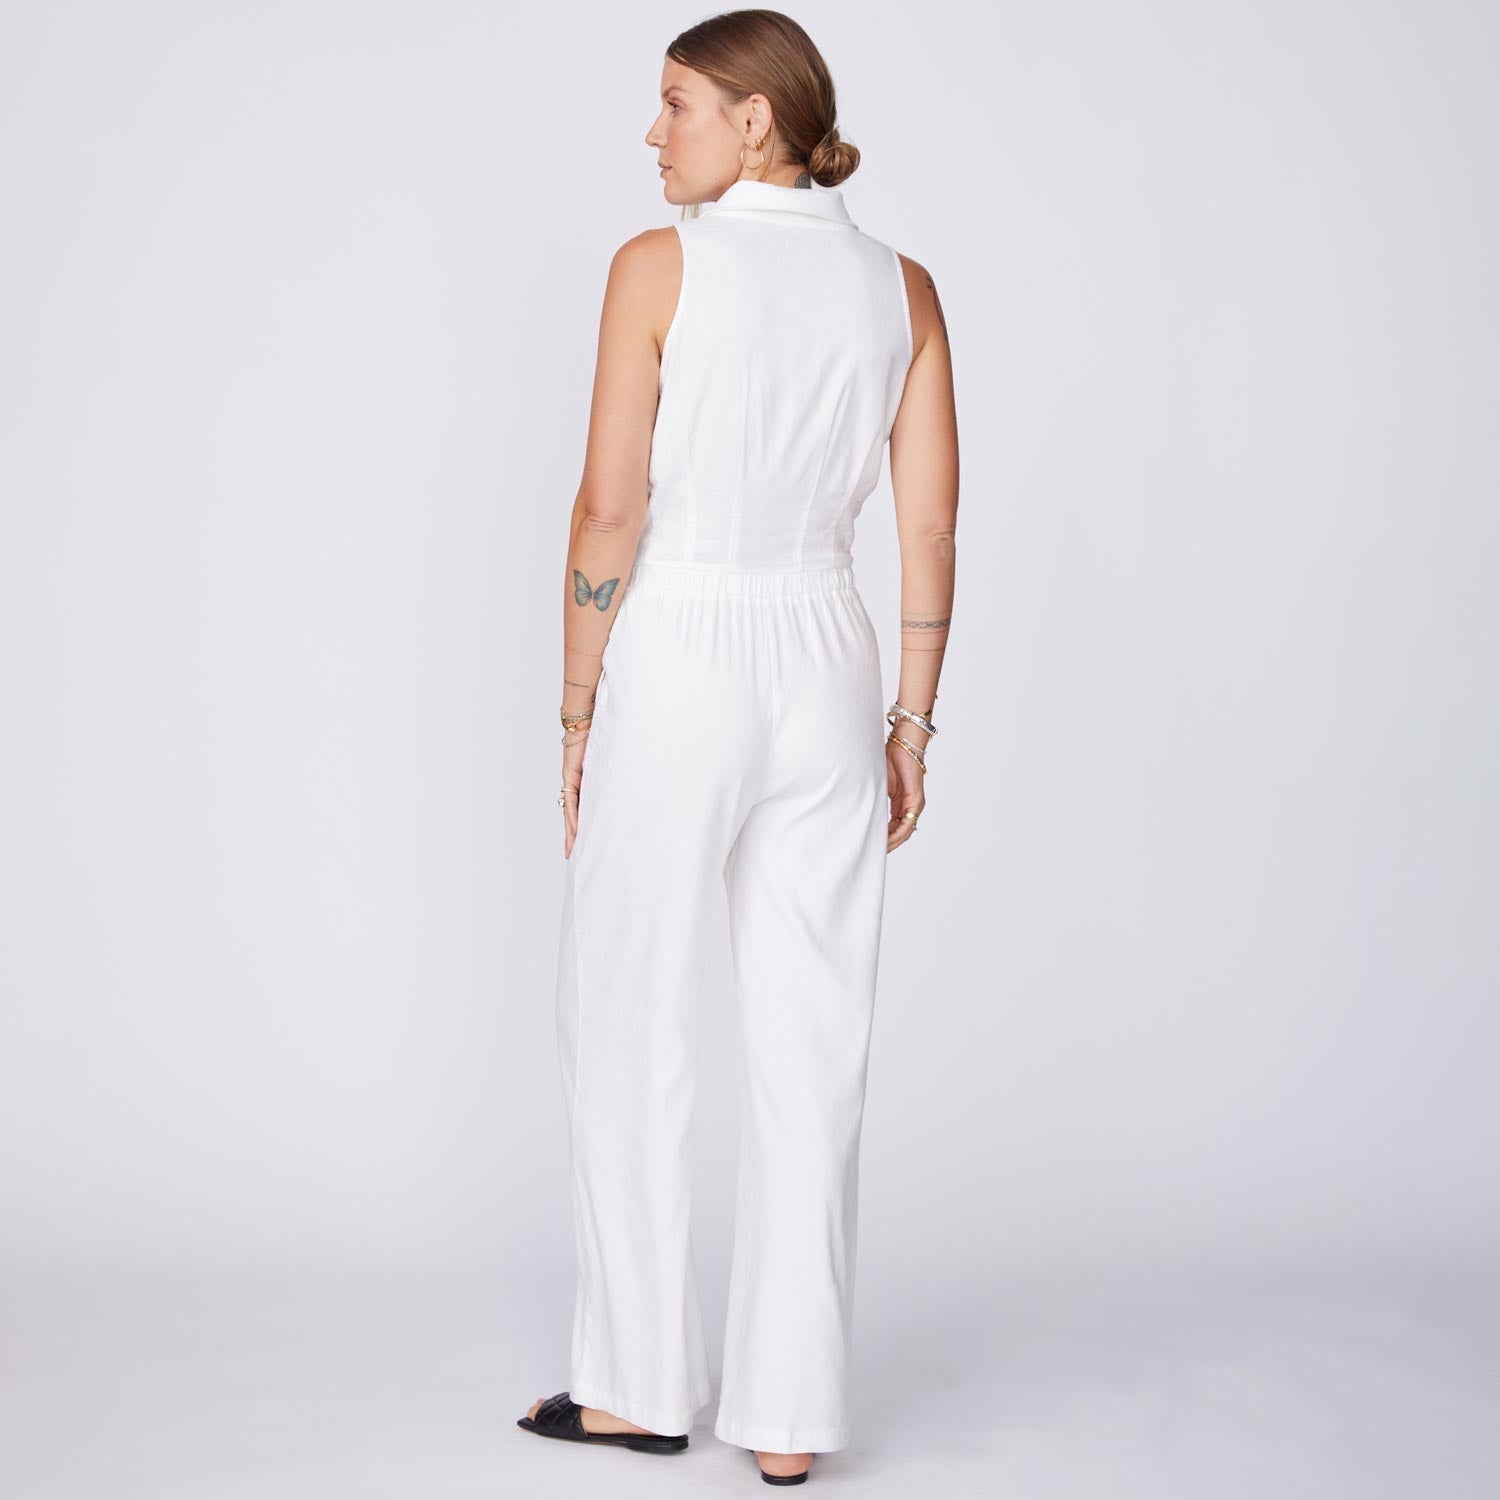 Back View of model wearing the Linen Halter Polo Jumpsuit in White